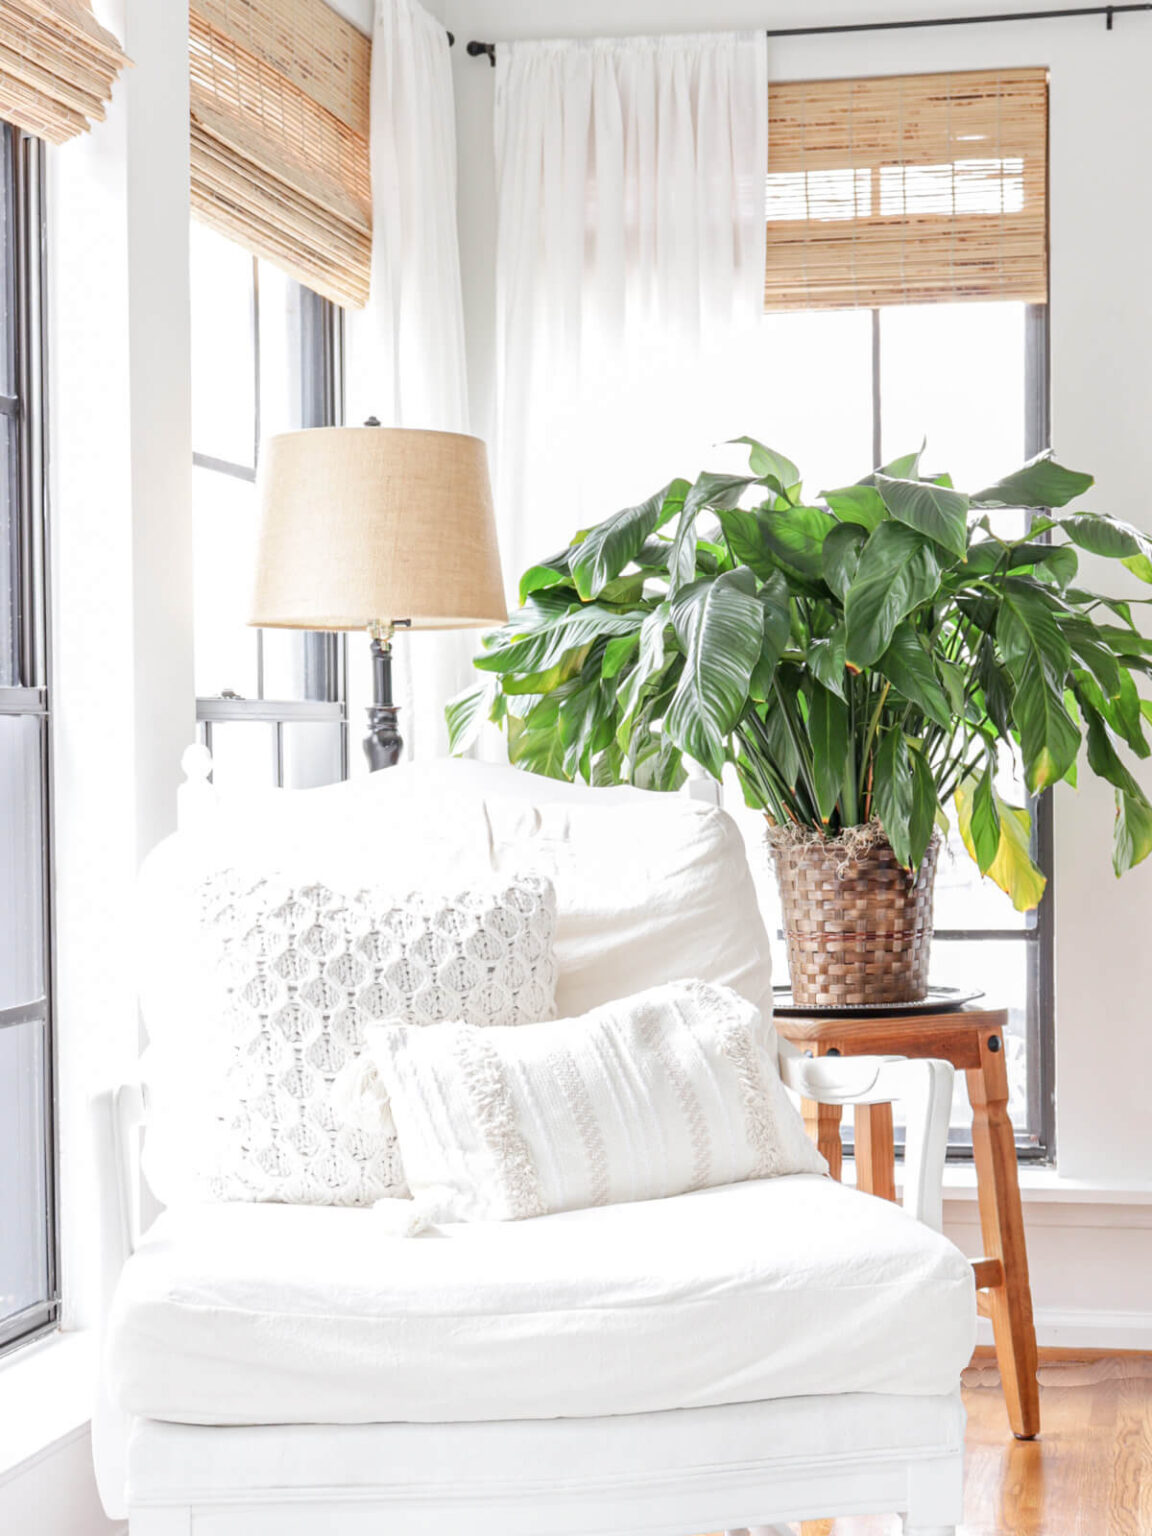 Sunroom Decorating Ideas for Spring - Your Home Renewed